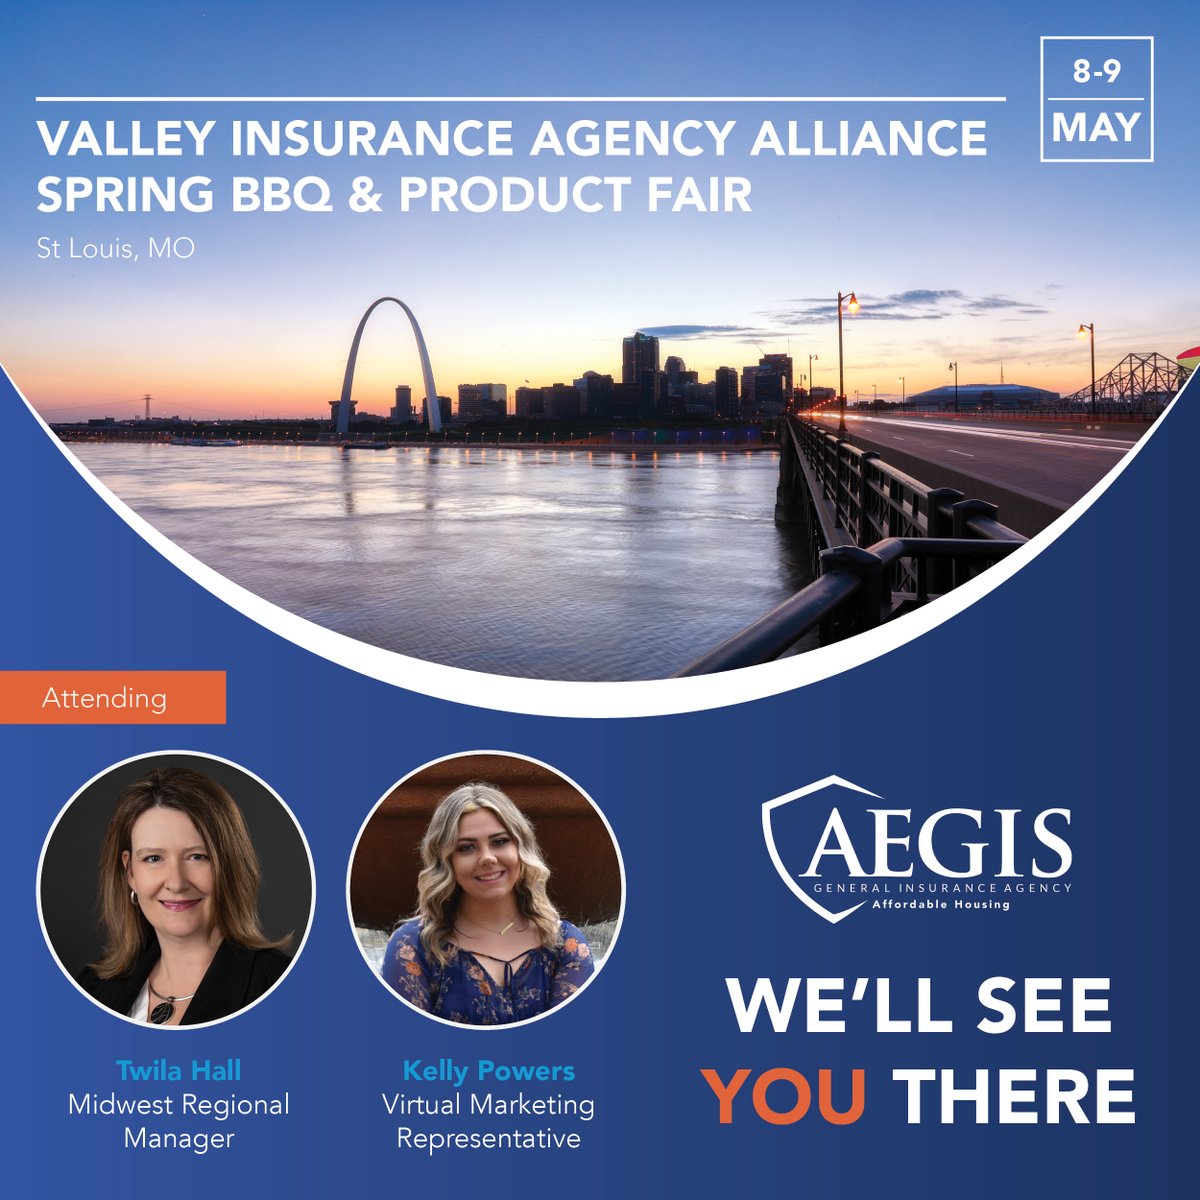 Twila Hall and Kelly Powers are looking forward to the VIAA Spring Barbeque and Product fair this week in St. Louis, Missouri. The duo is looking forward to speaking with new and existing agents, so be sure to say hello if you will be in attendance. #AegisNation #VIAA